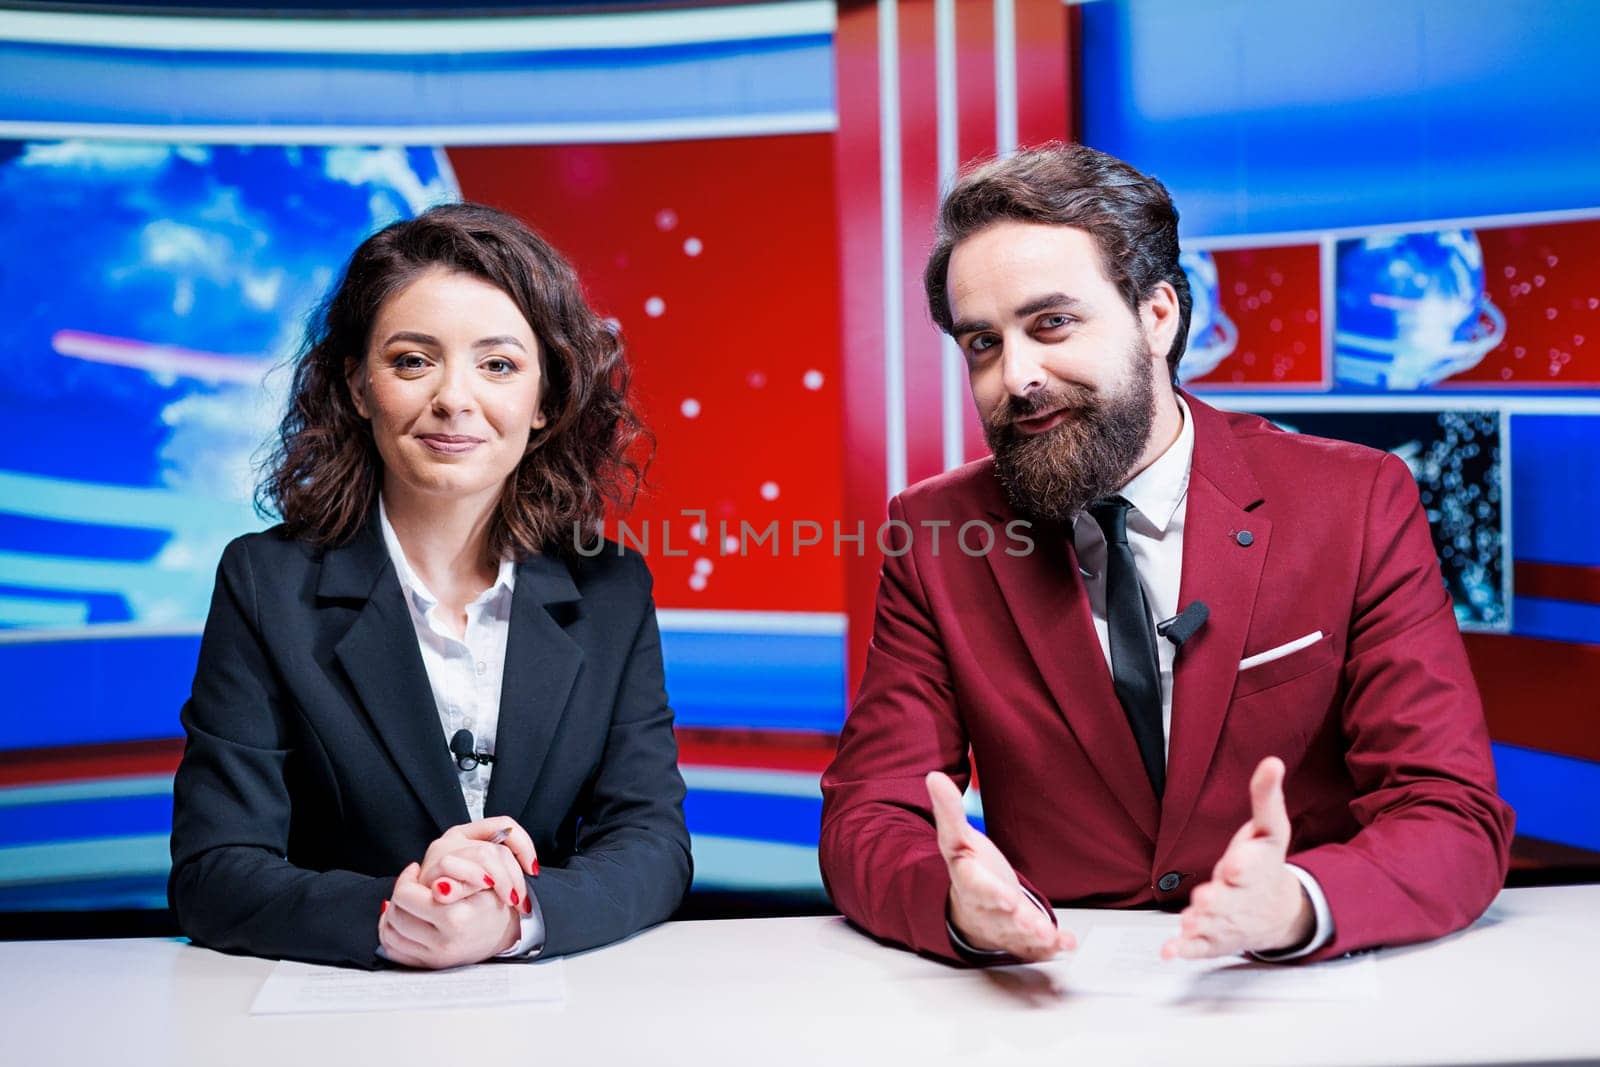 Media reporters going live on tv to present latest news and international events, transmitting broadcast on global television program. Team of presenters reading daily headlines in newsroom.